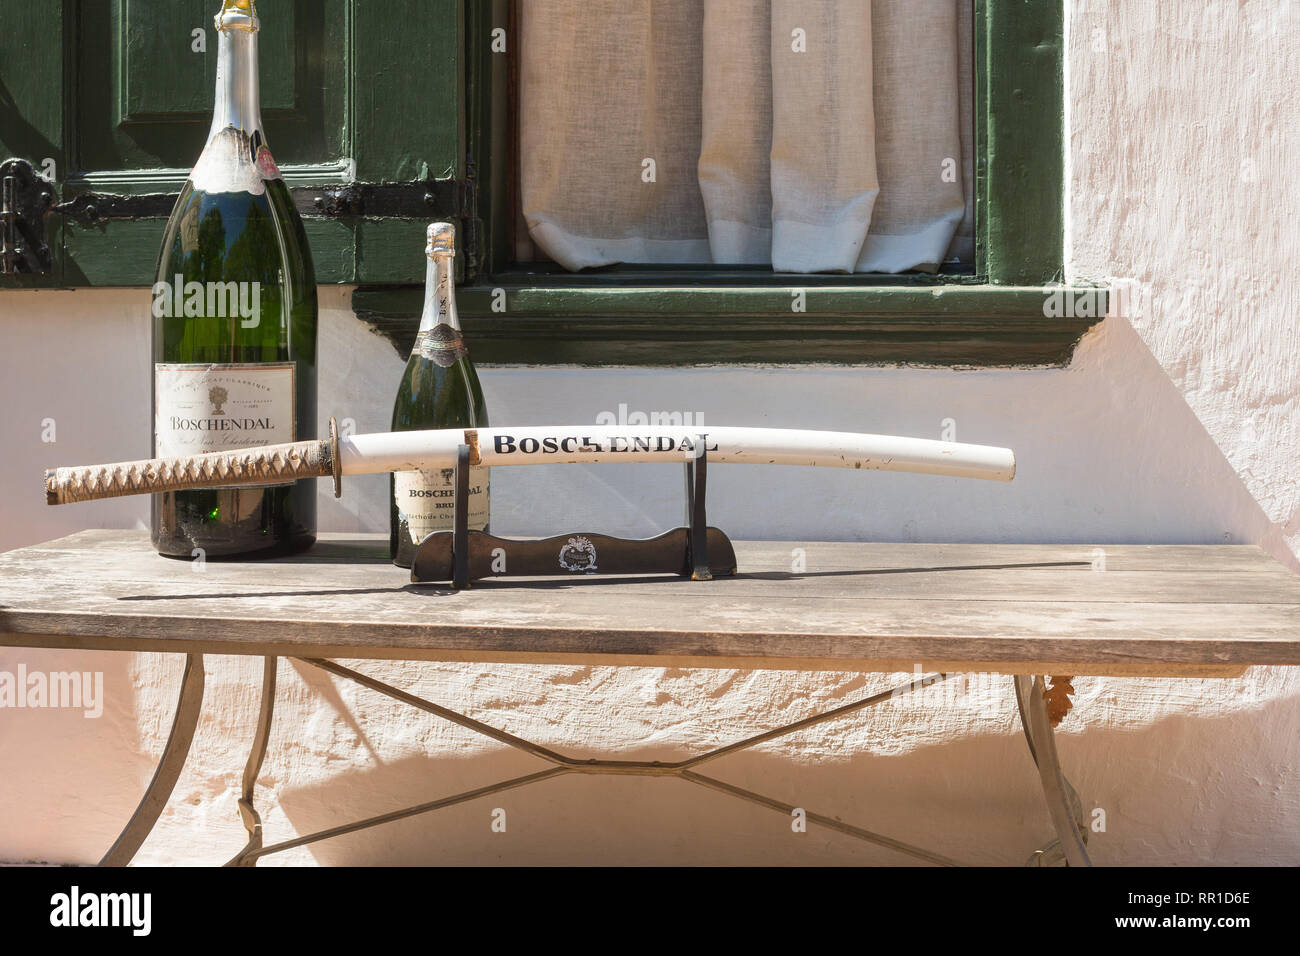 Boschendal wine estate sparkling wine bottles or magnums with a sword for sabrage on an outside table at the Manor house Cape Winelands, South Africa Stock Photo